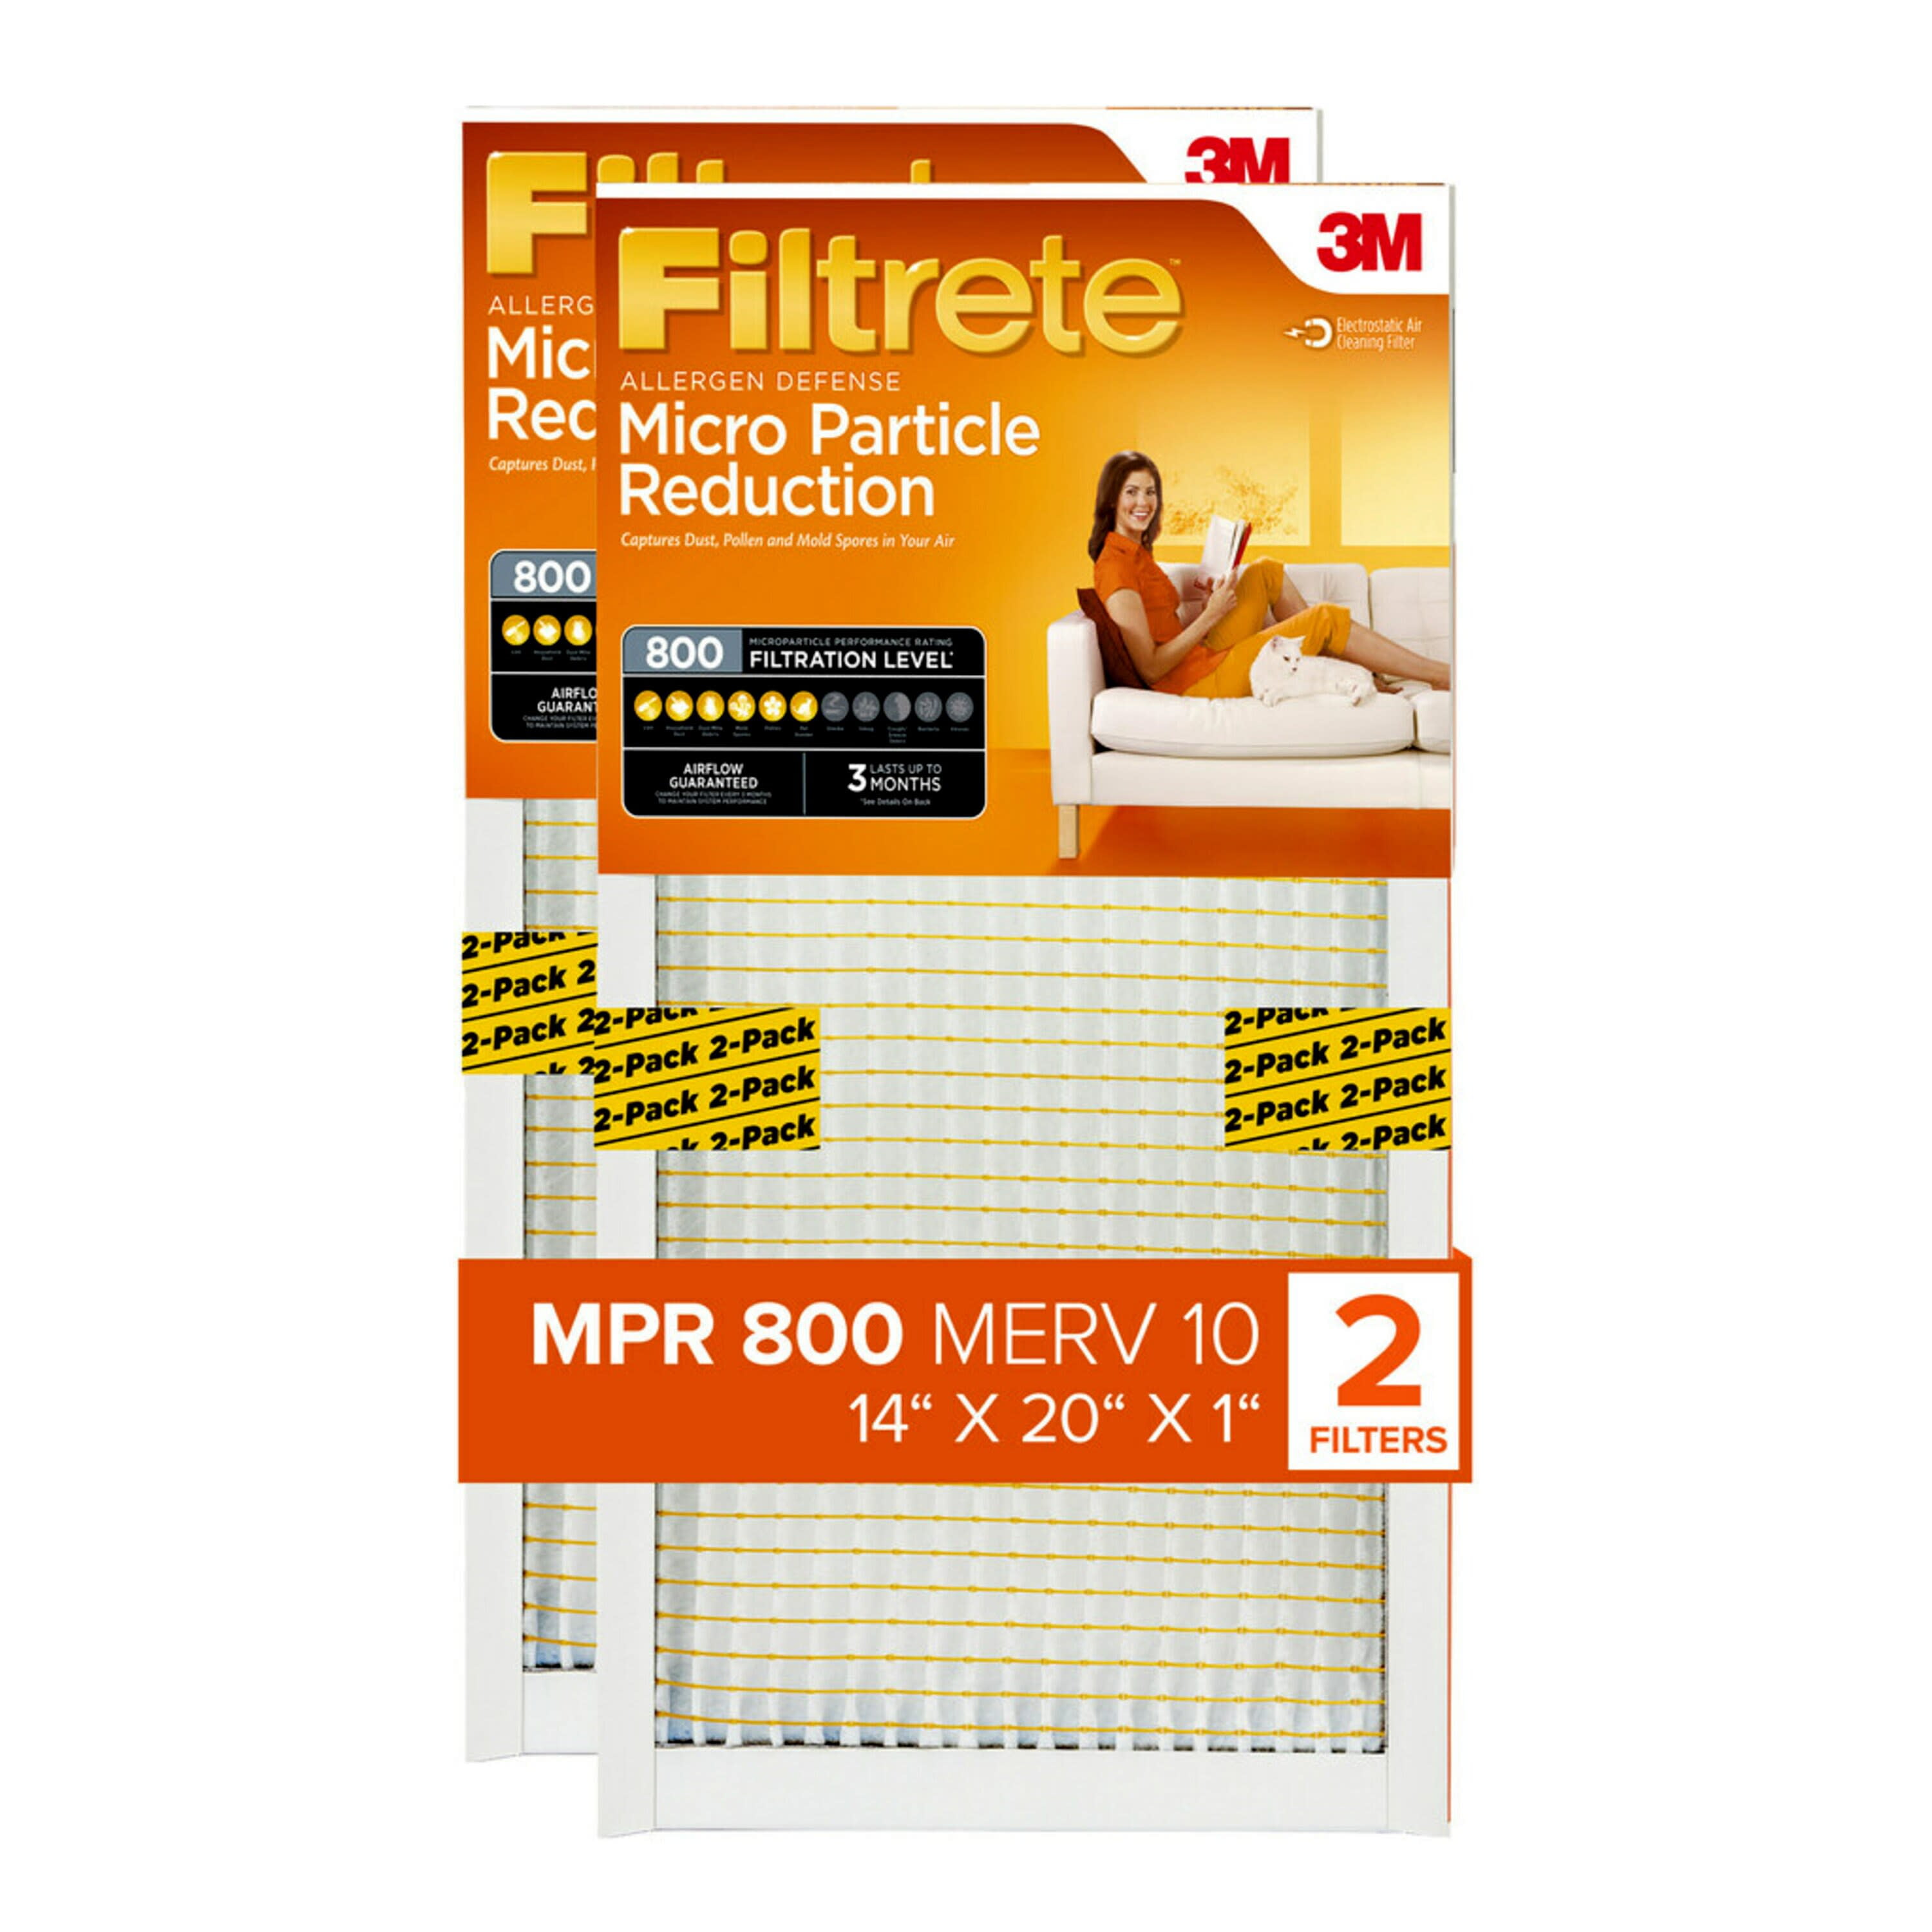 Filtrete by 3M, 14x20x1, MERV 10, Micro Particle Reduction HVAC Furnace Air Filter, Captures Pet Dander and Pollen, 800 MPR, 2 Filters